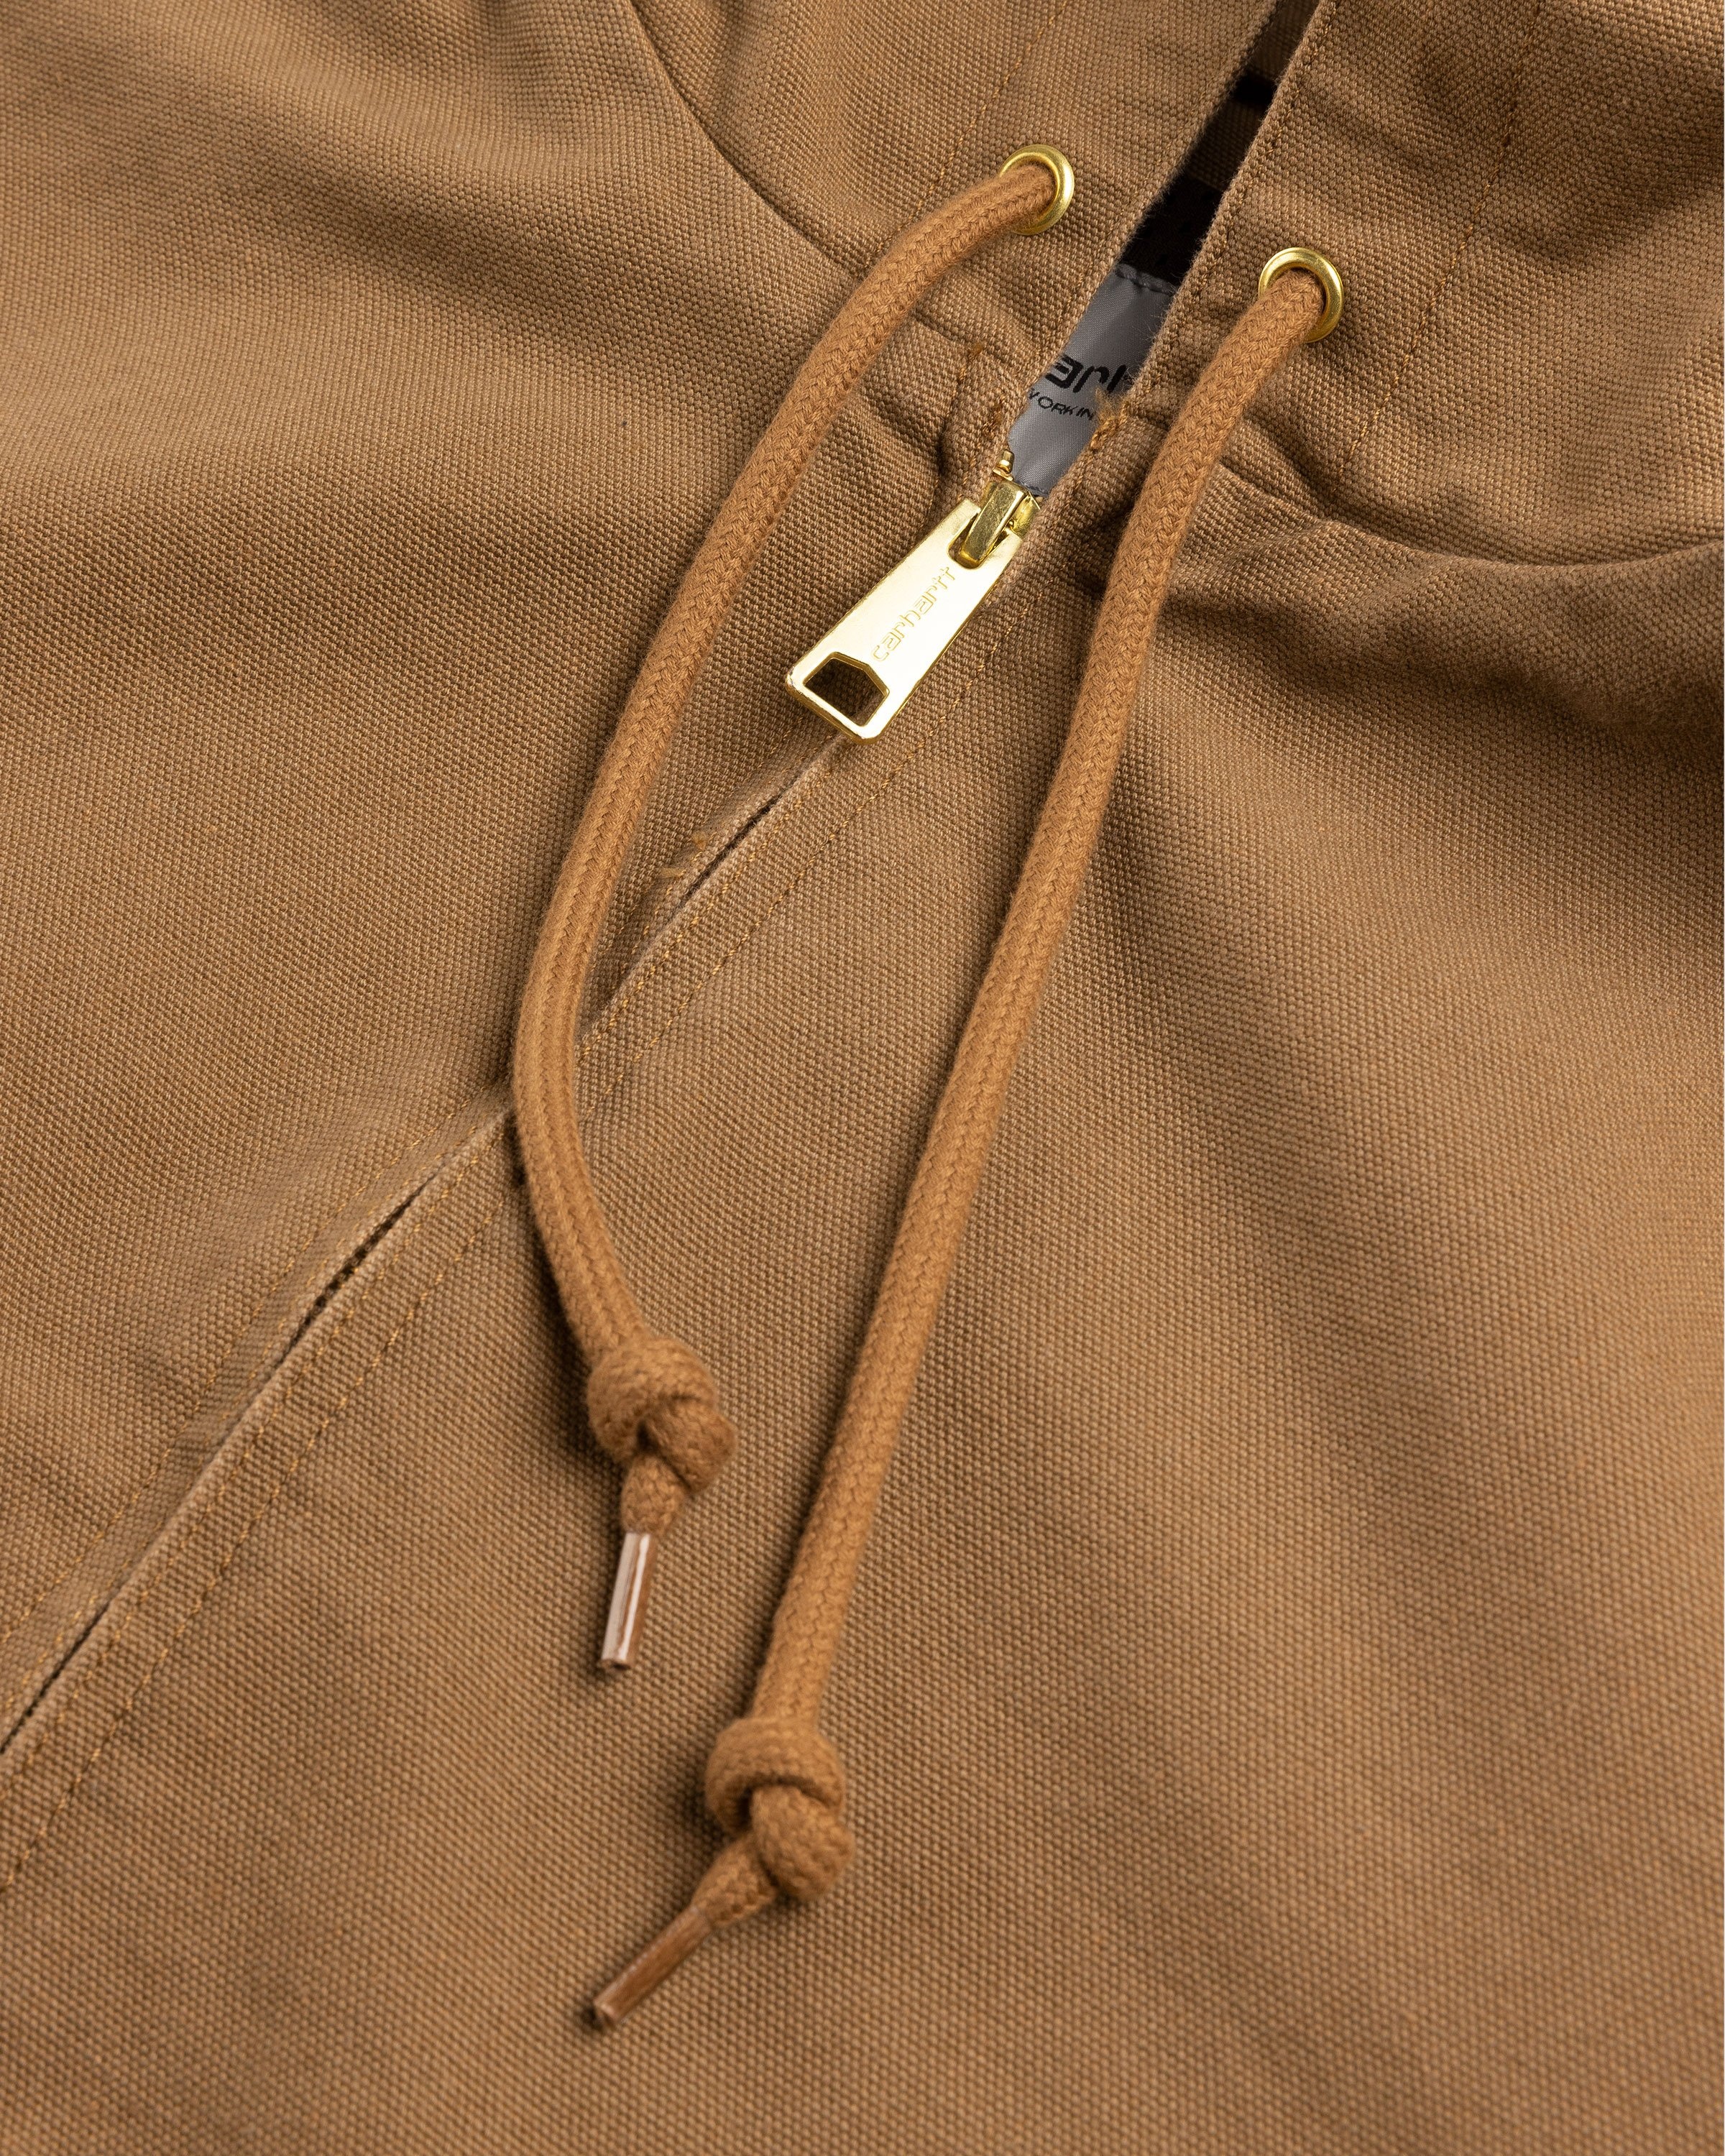 Carhartt WIP – Active Jacket Brown - Outerwear - Brown - Image 6